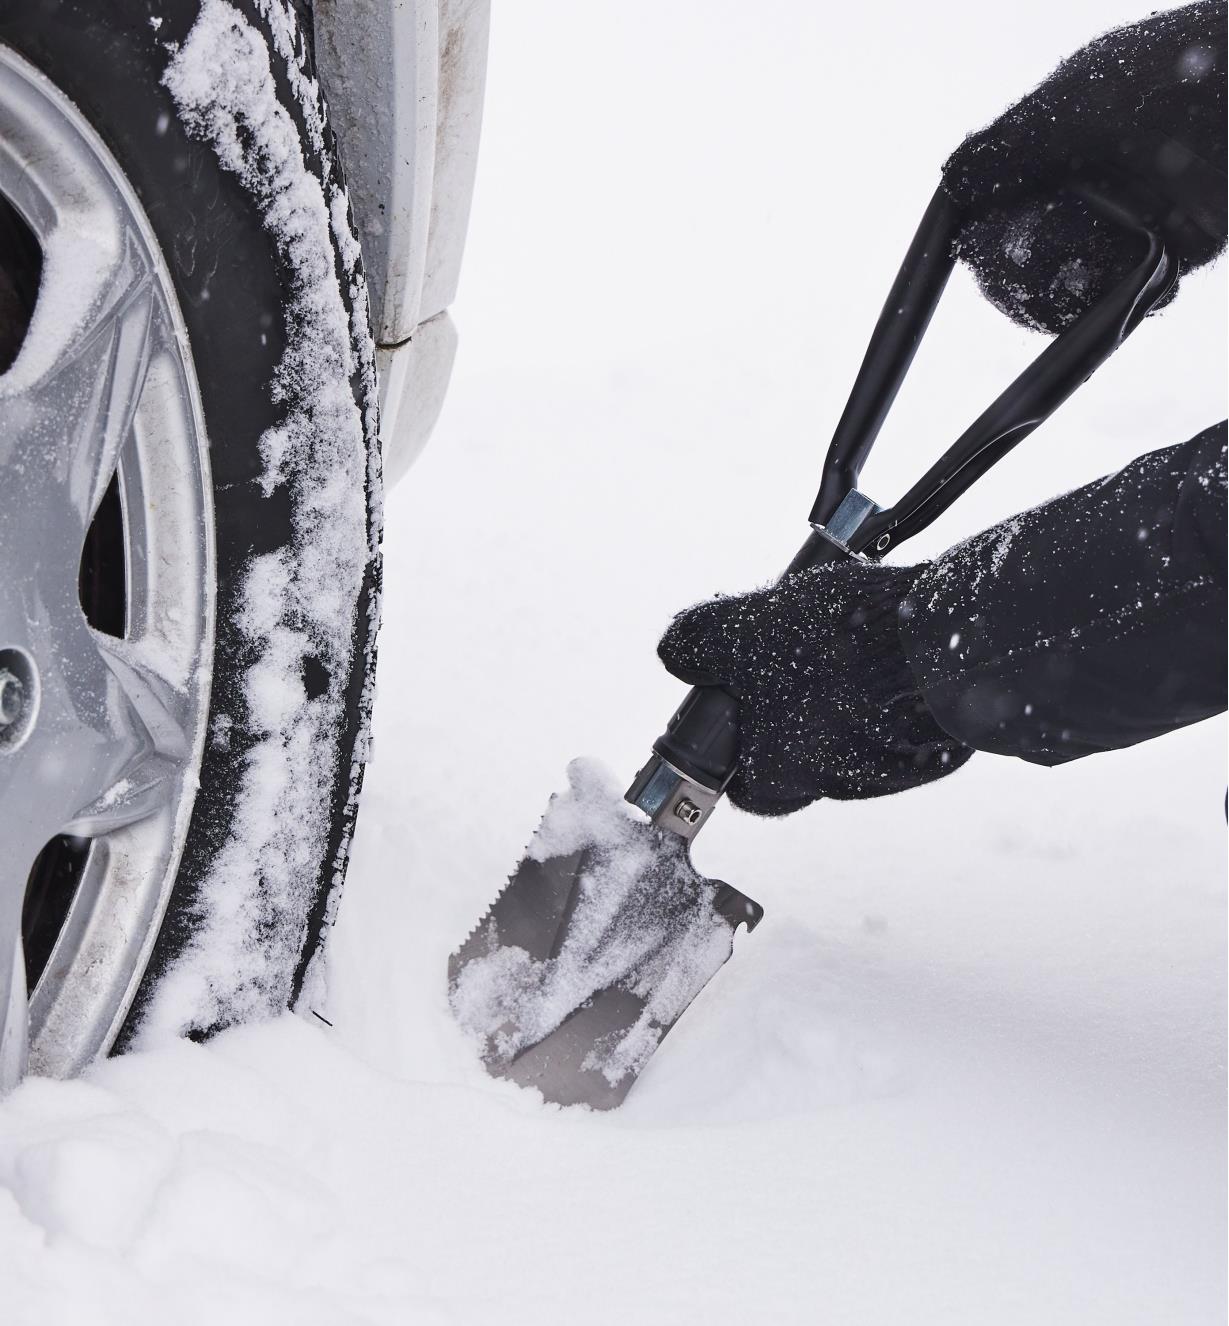 A folding shovel being used to dig snow from around a car tire